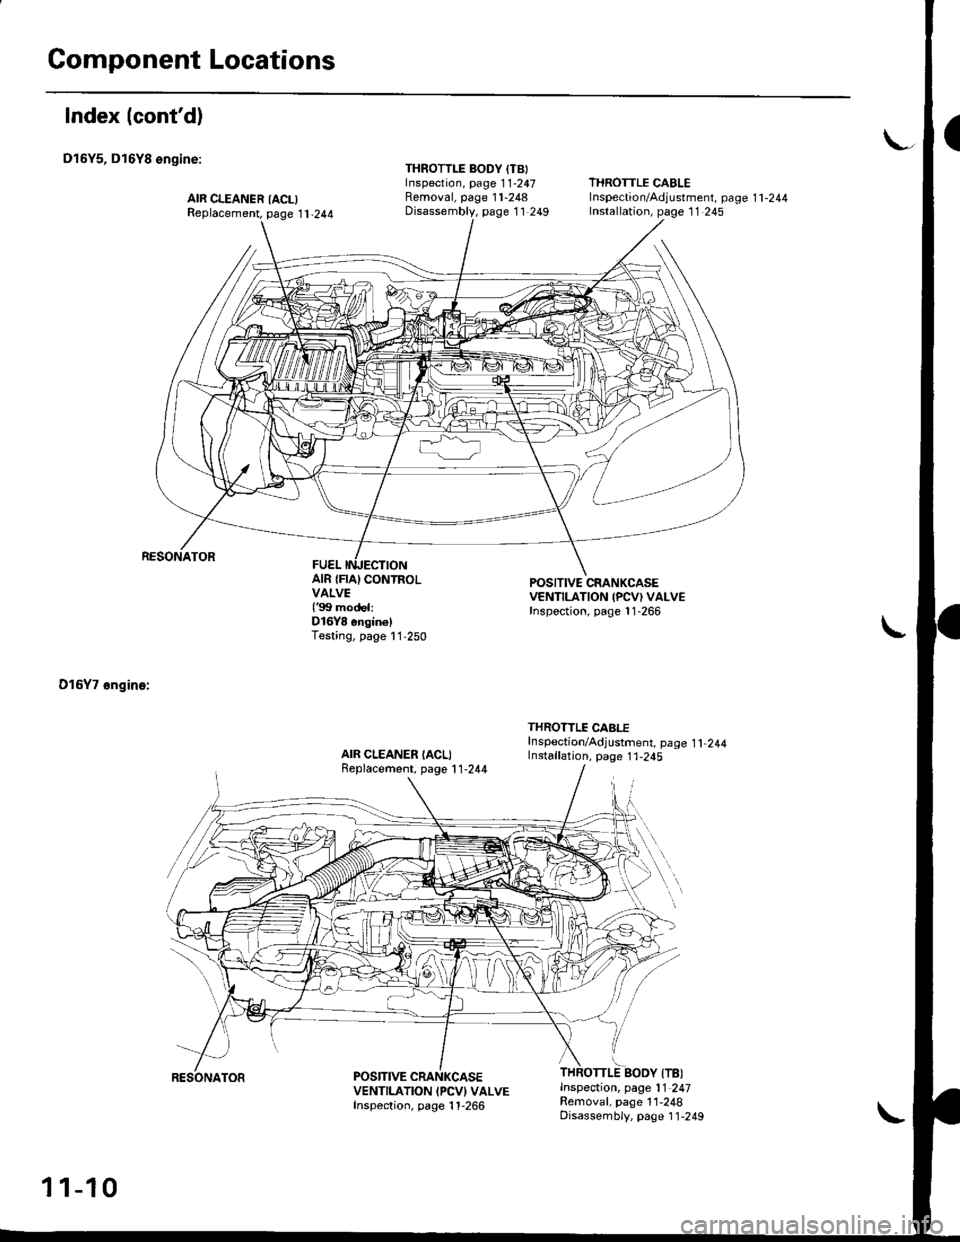 HONDA CIVIC 1999 6.G Workshop Manual Component Locations
Index (contd)
D16Y5, D16Y8 ongine:
RESONATOR
D16Y7 6ngin€:
AIR CLEANER IACLIReplacement, page 11-244
THROTTLE BODY (TBIInspection, page 1 1-247Removal, page 11-248Disassembly, p